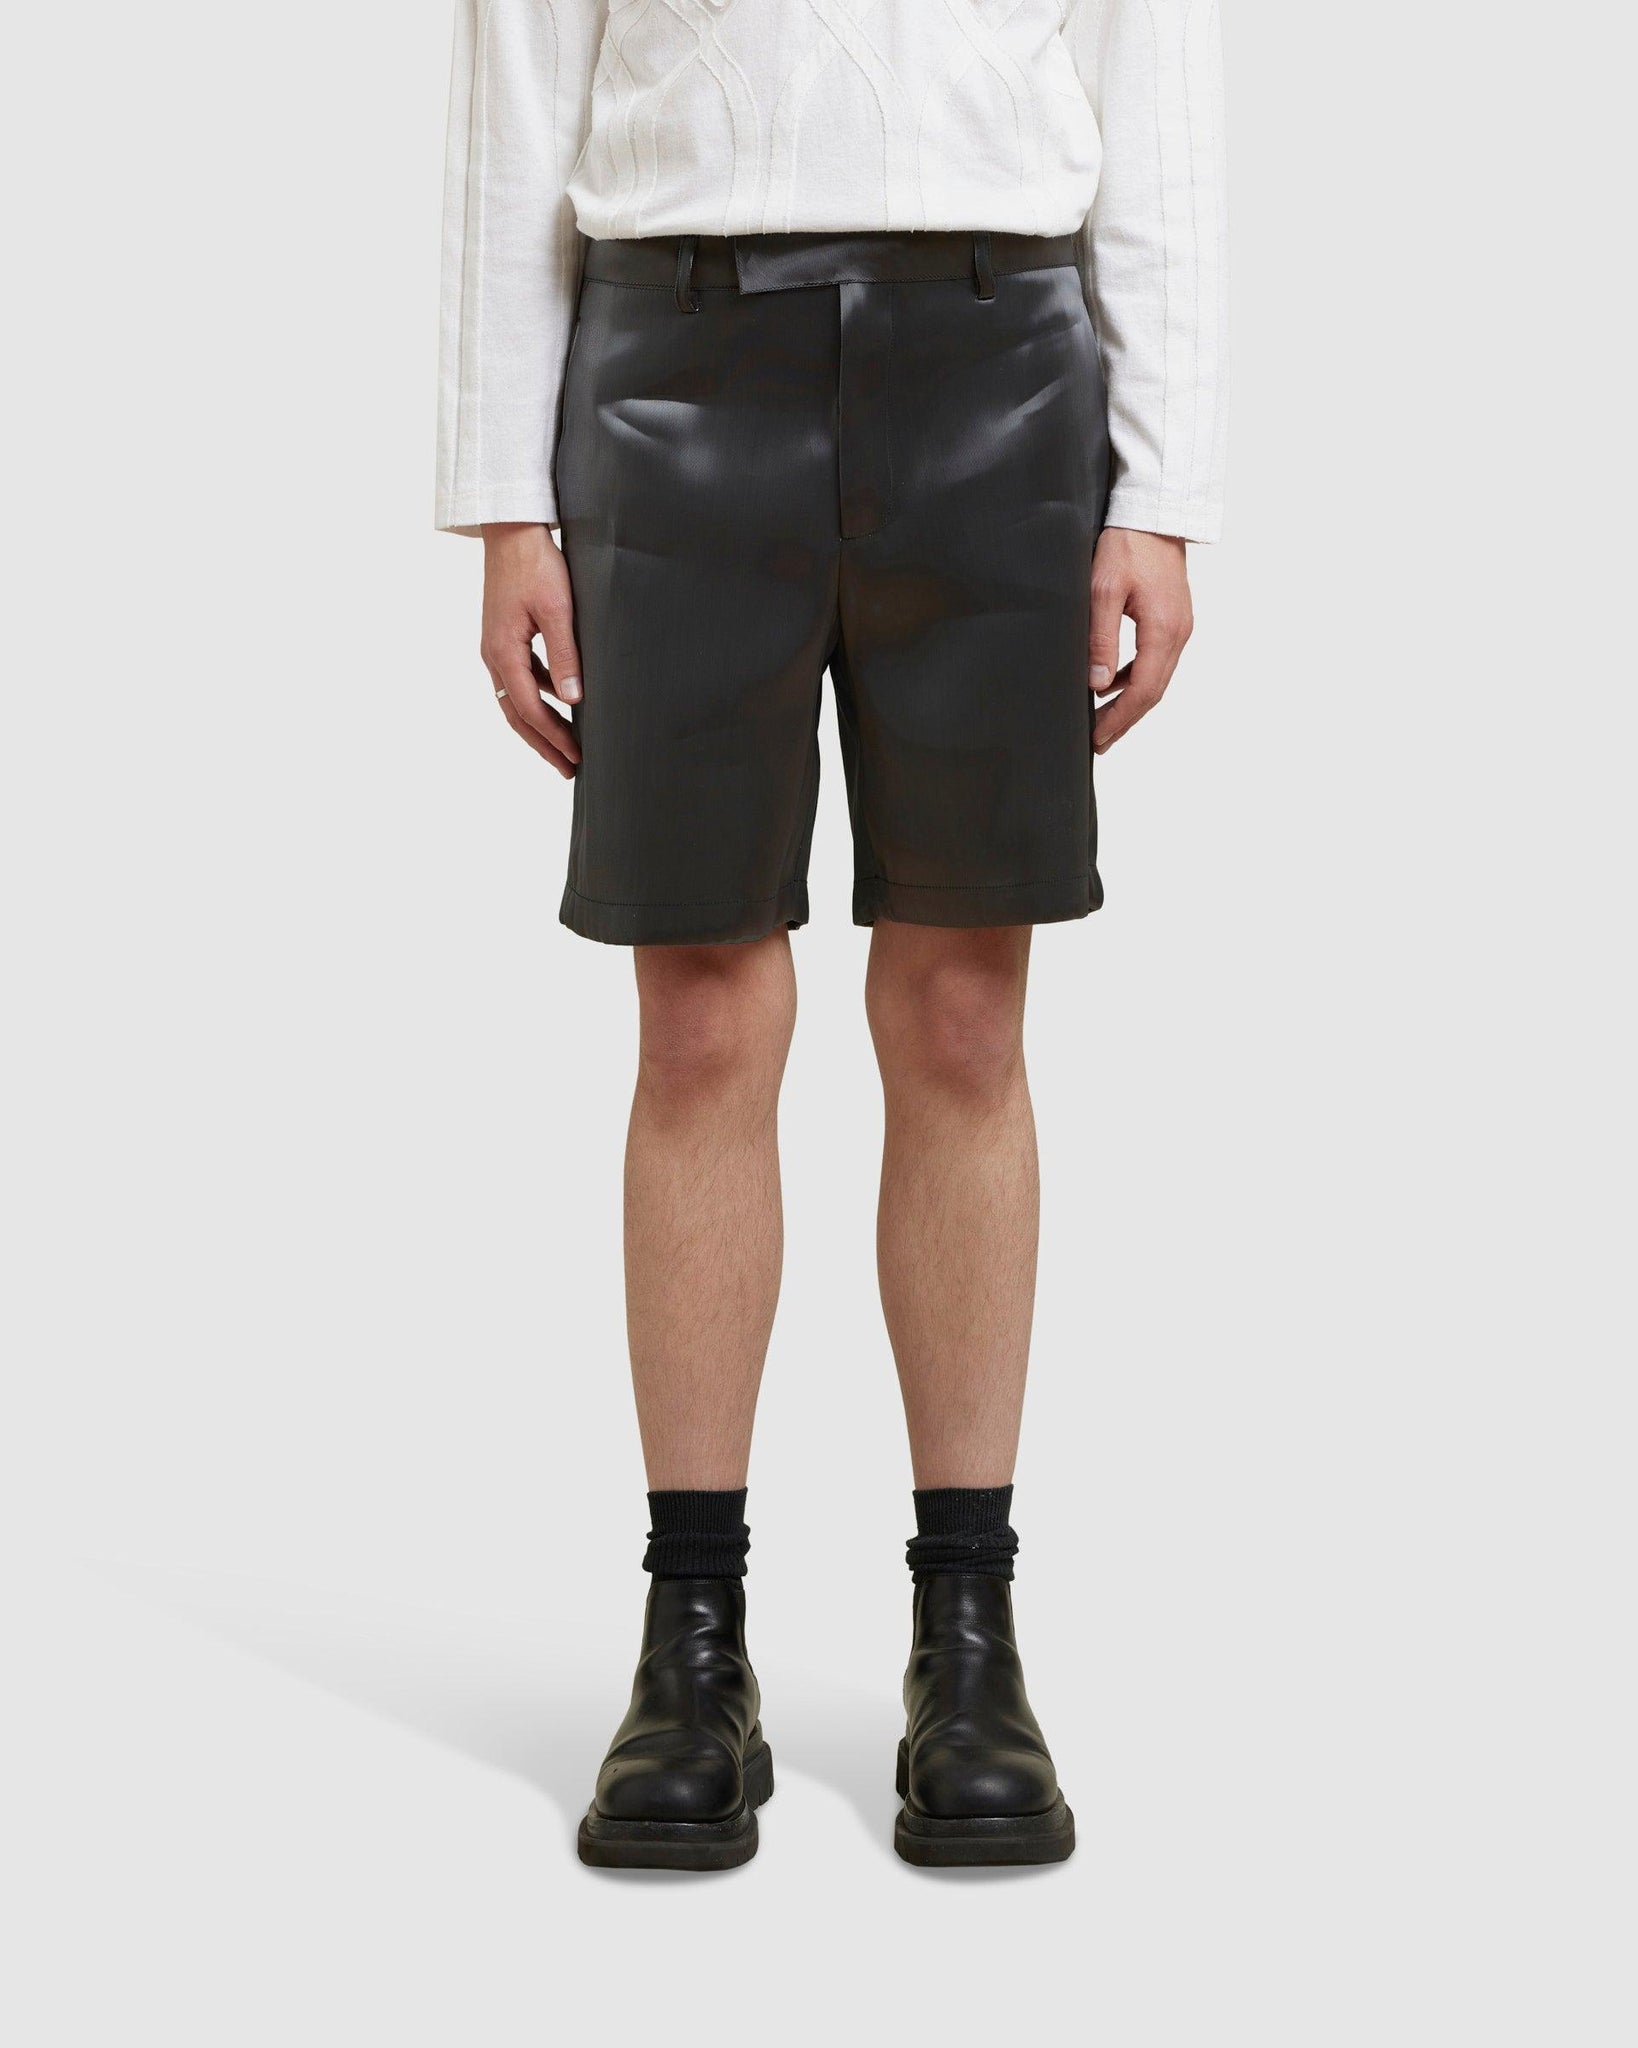 Liquid Metal Shorts - {{ collection.title }} - Chinatown Country Club 